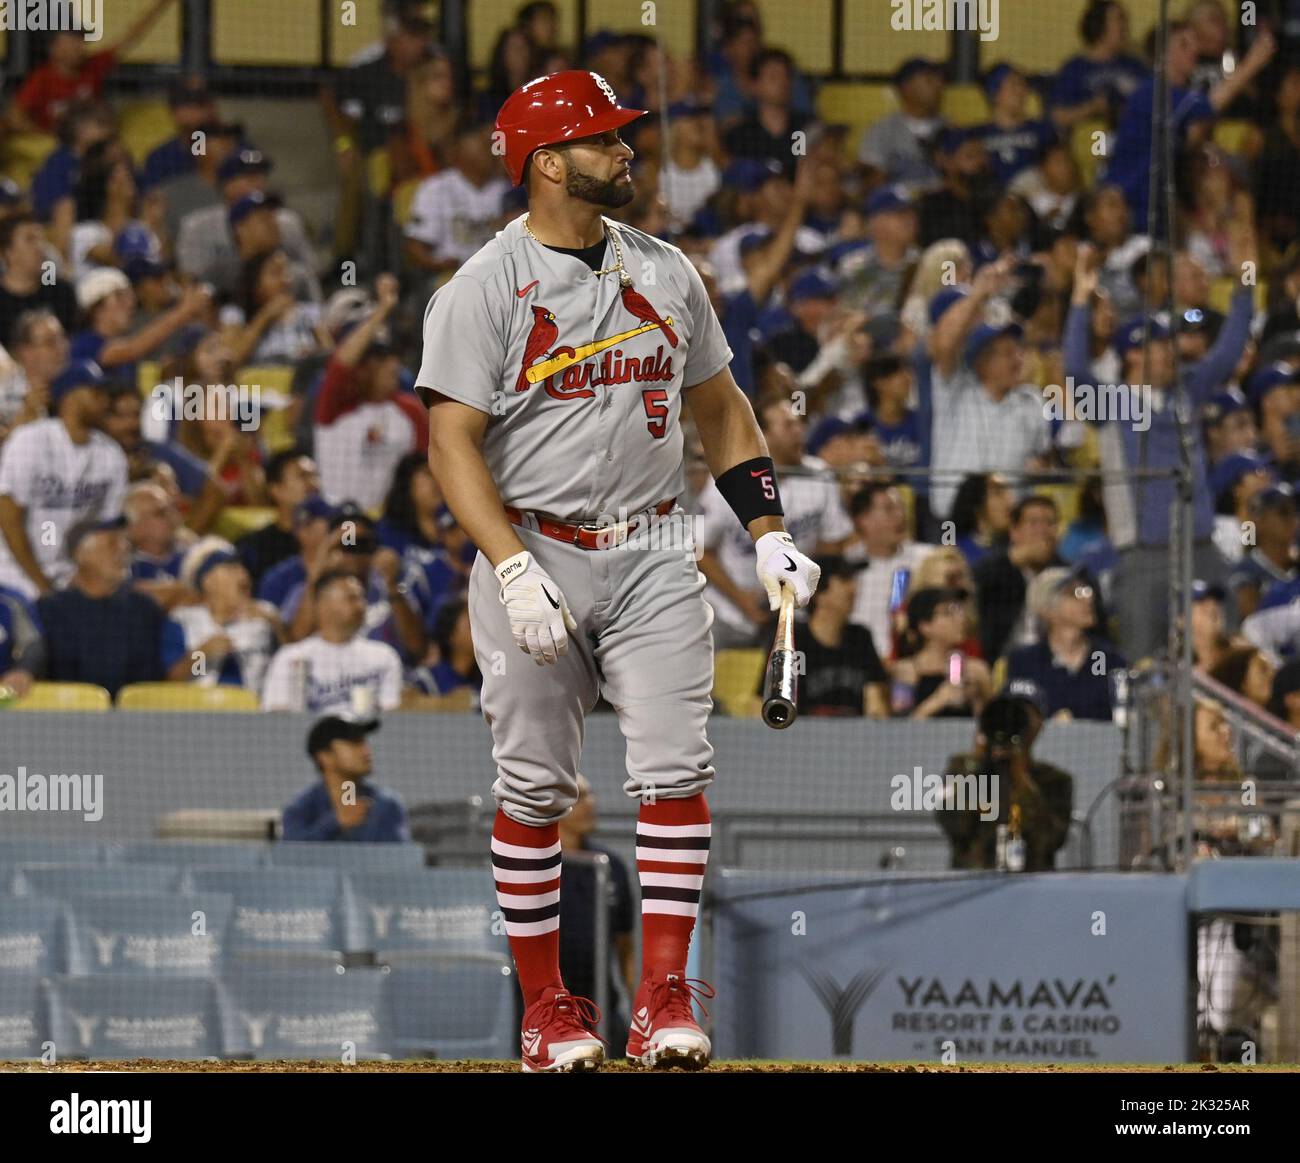 Los Angeles, United States. 23rd Sep, 2022. St. Louis Cardinals slugger Albert Pujols watches his 699th home run, a two-run blast that travelled 454 feet into the left-field pavilion, off Dodgers starting pitcher Andrew Heaney during the third inning at Dodger Stadium in Los Angeles on Friday, September 23, 2022. Photo by Jim Ruymen/UPI Credit: UPI/Alamy Live News Stock Photo